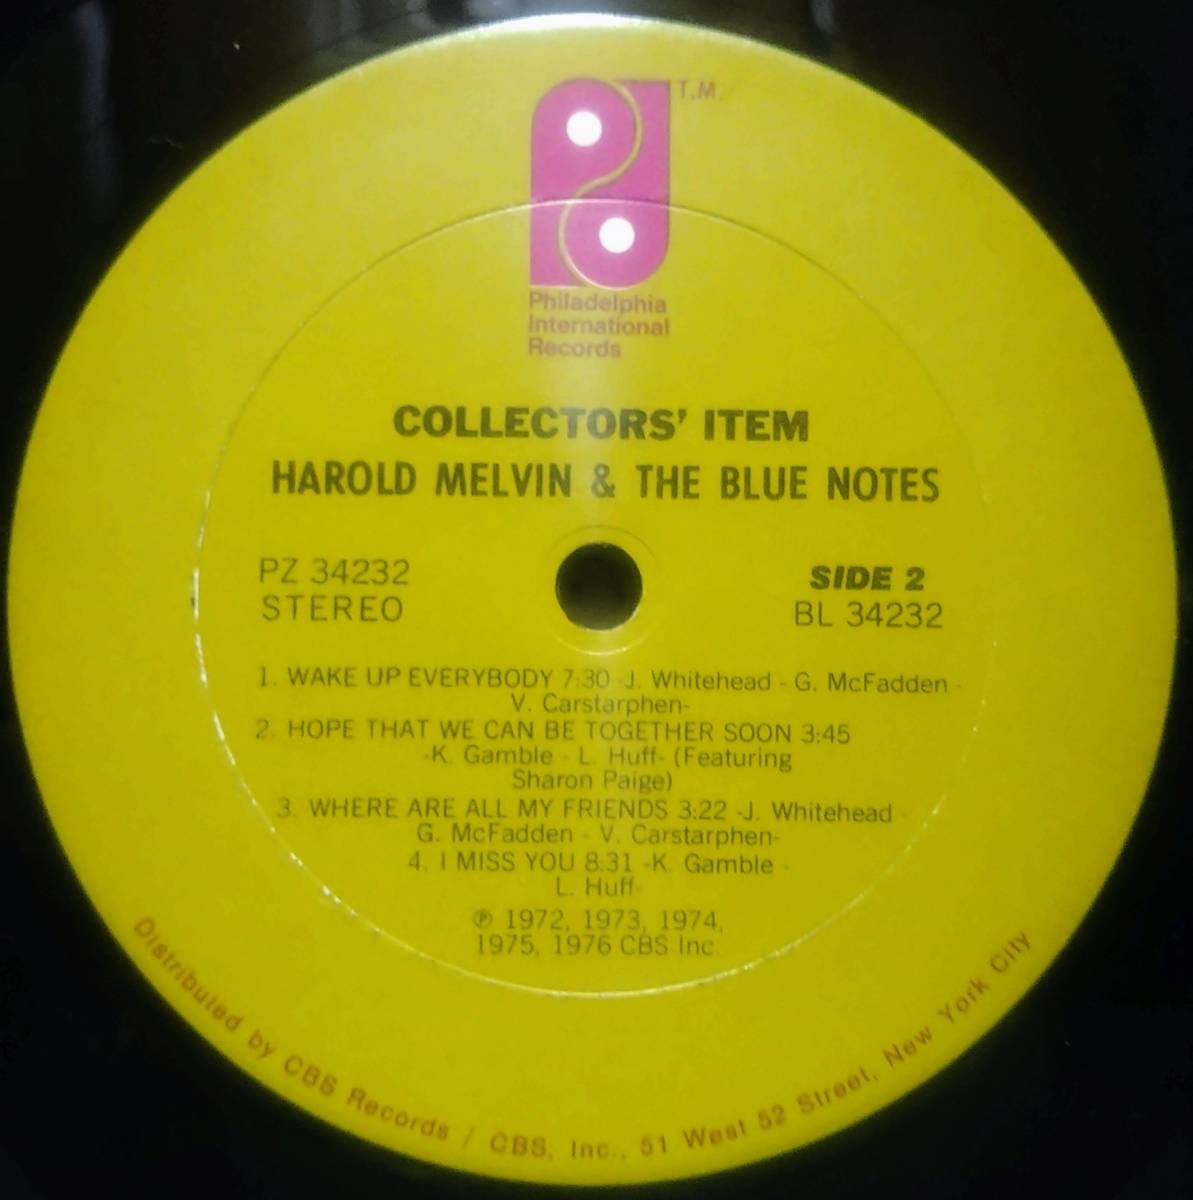 【LP Soul】Harold Melvin & The Blue Notes「All Their Greatest Hits Collectors' Item」US盤 シュリンク付 The Love I Lost.他 収録！_Side2